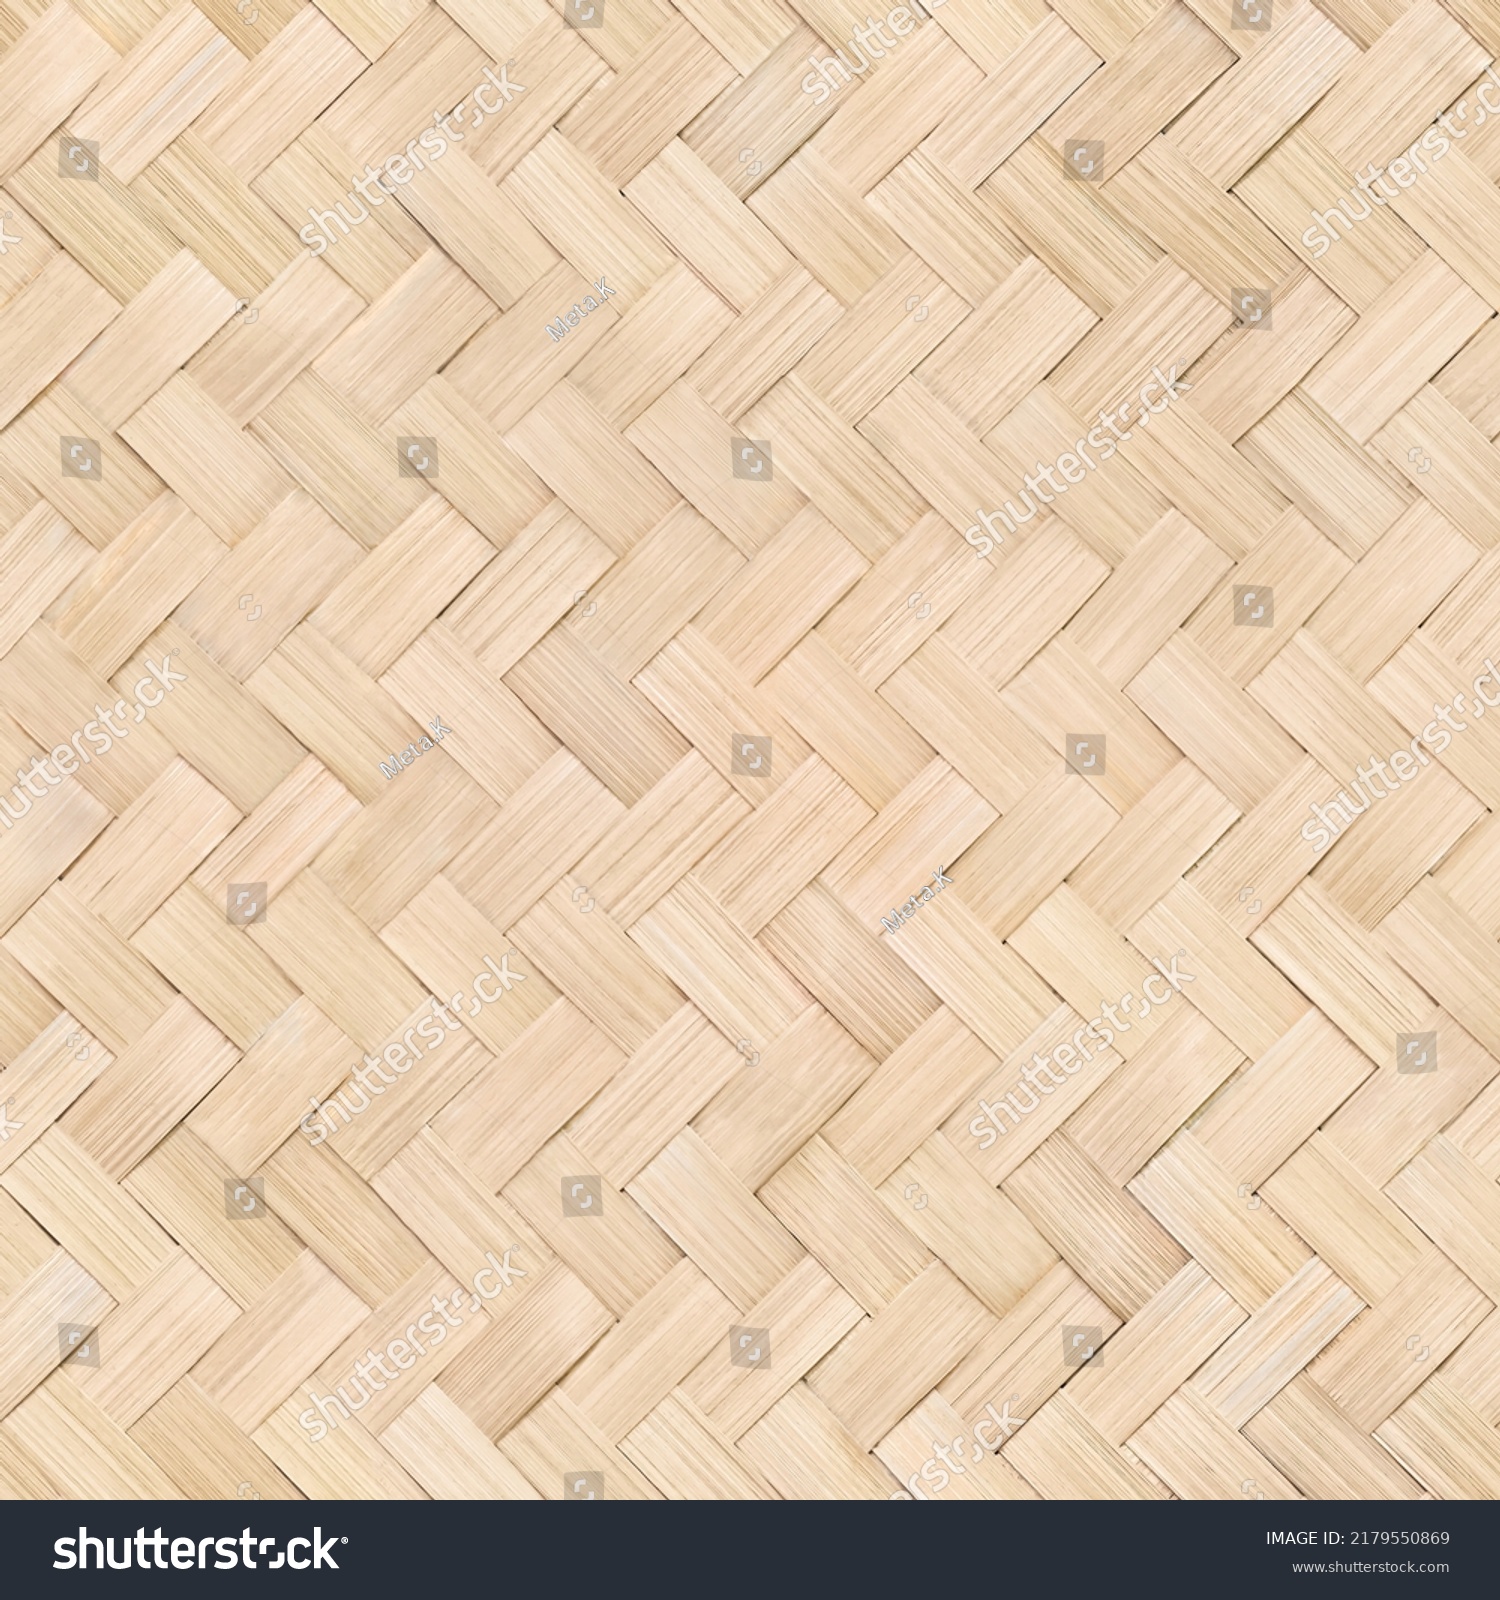 Real Seamless Texture repeating pattern woven bamboo mat board. #2179550869